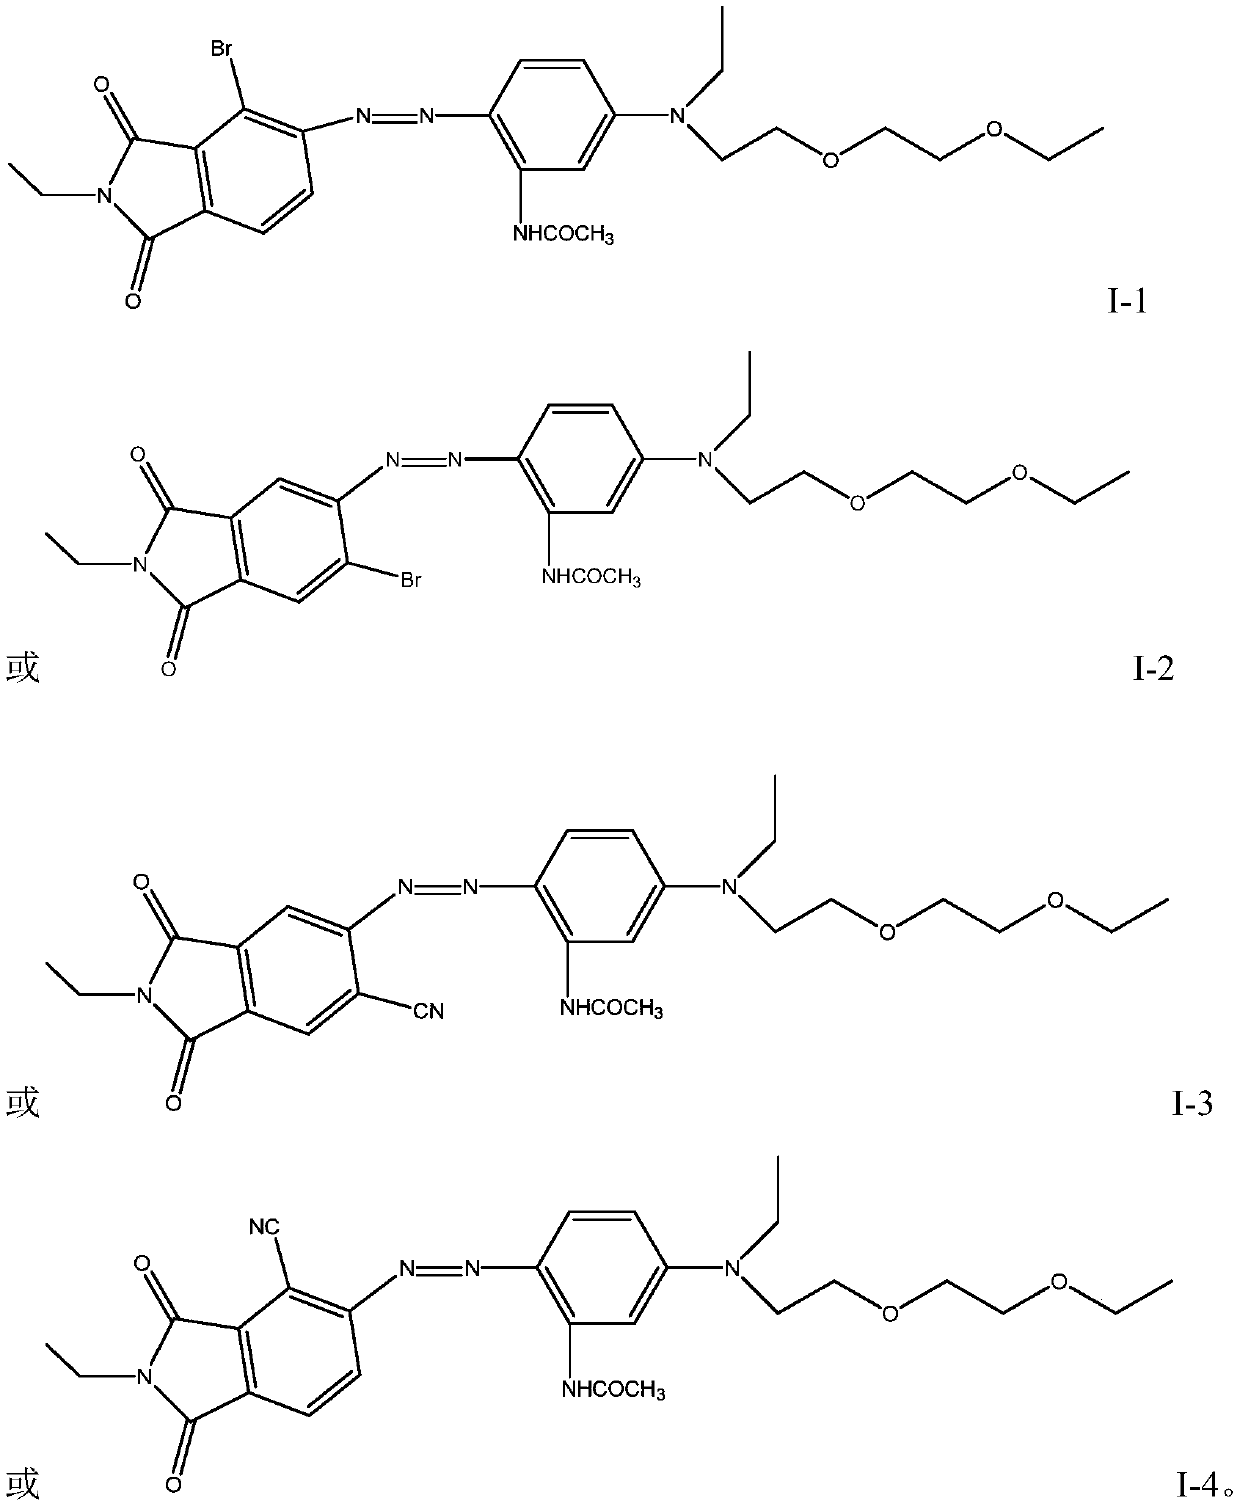 A kind of azo dye compound containing acetamide group and its preparation method and application